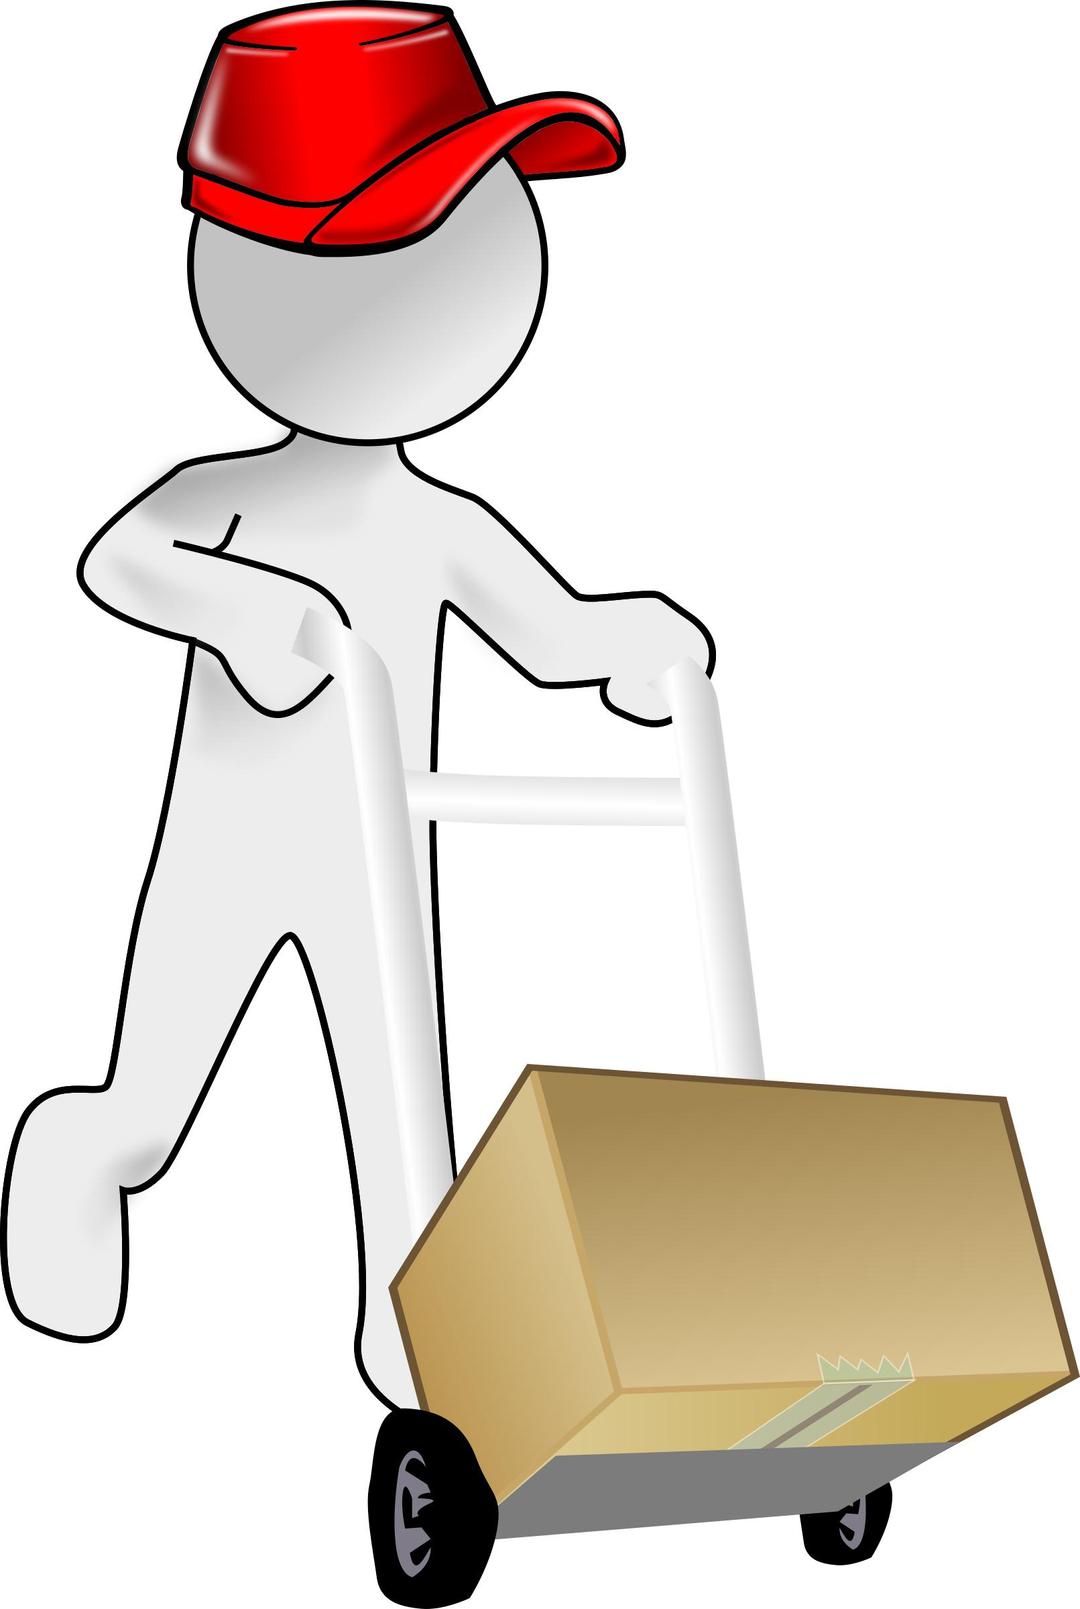 Bubble Person carrying a packet using a crate png transparent